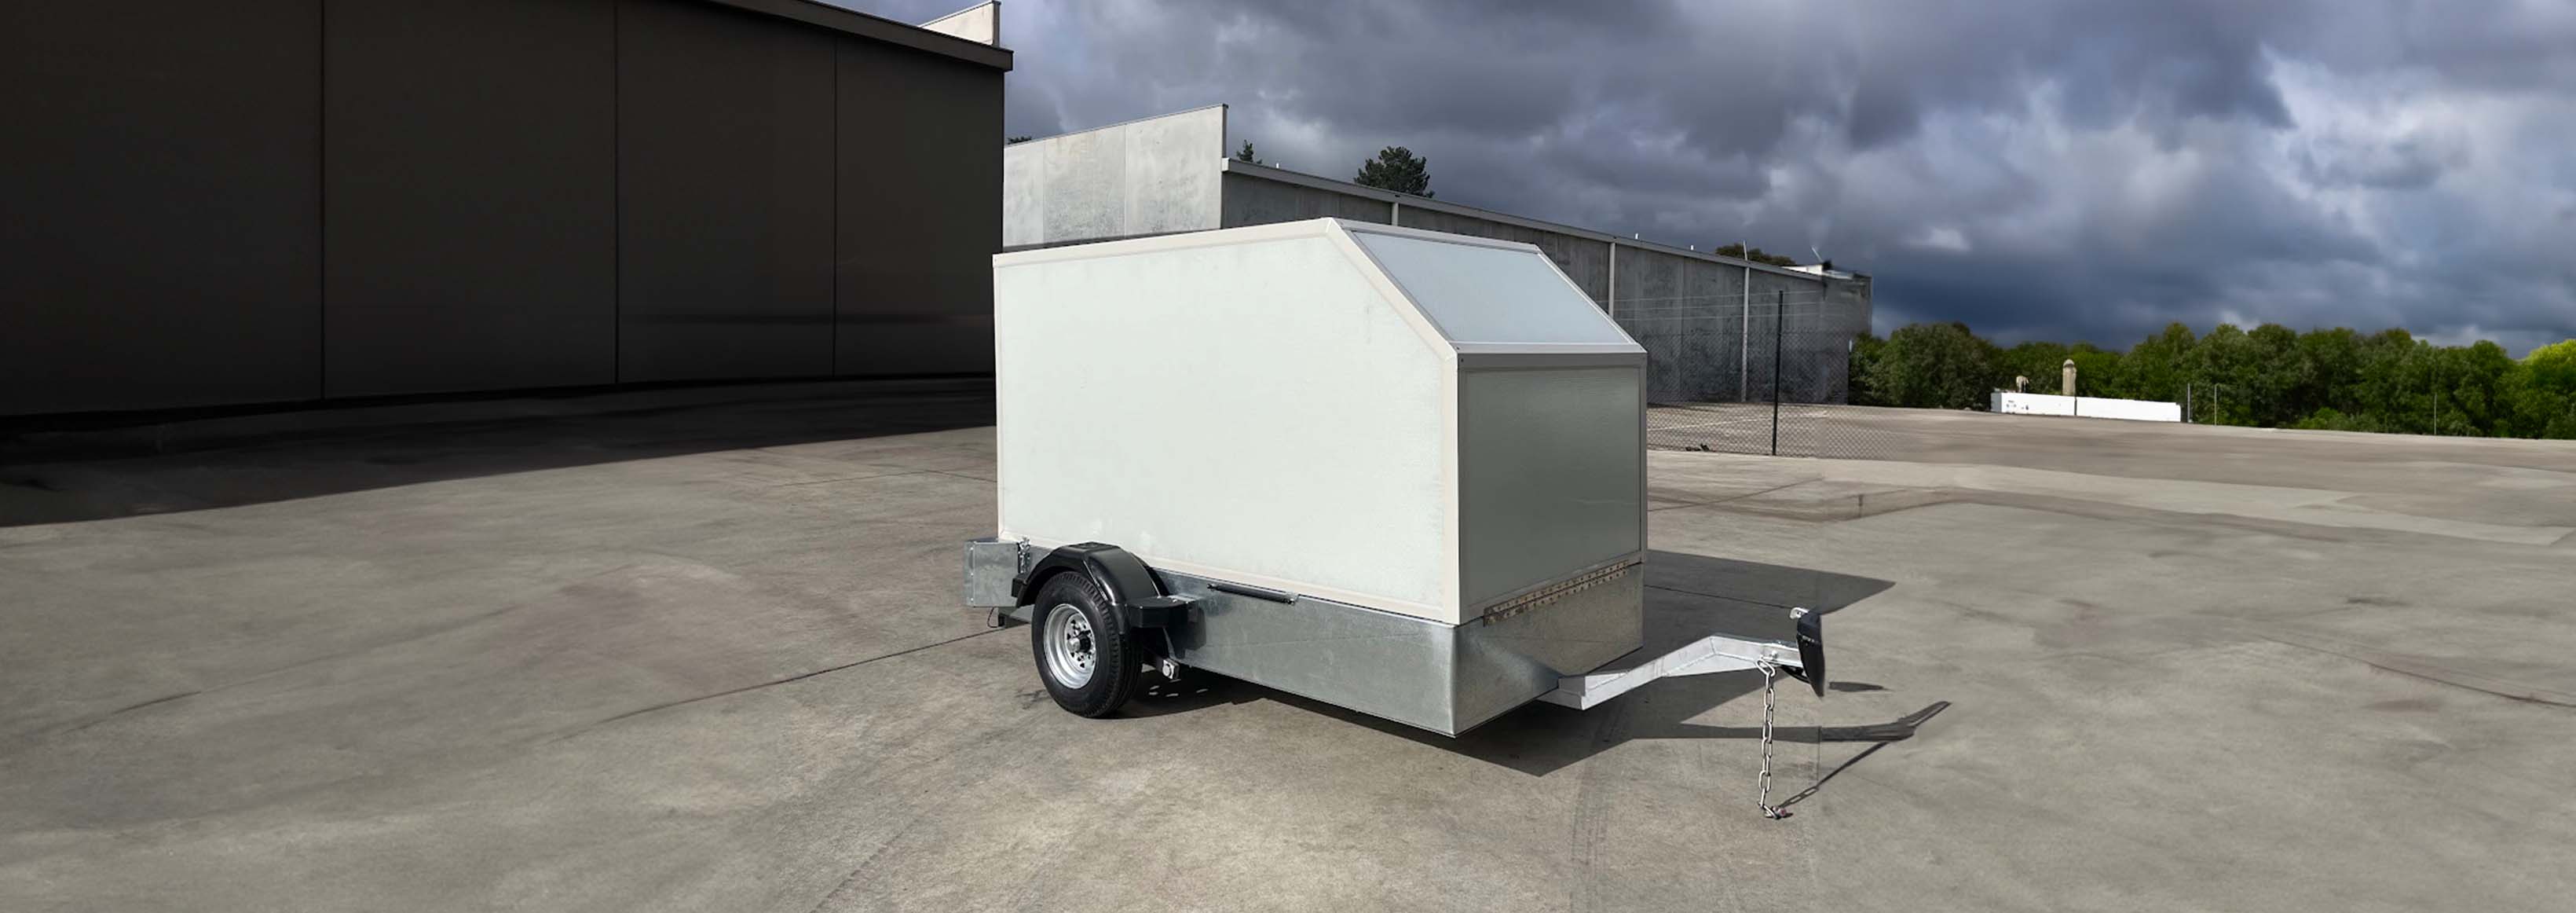 Lay Flat Mobility Scooter Trailers